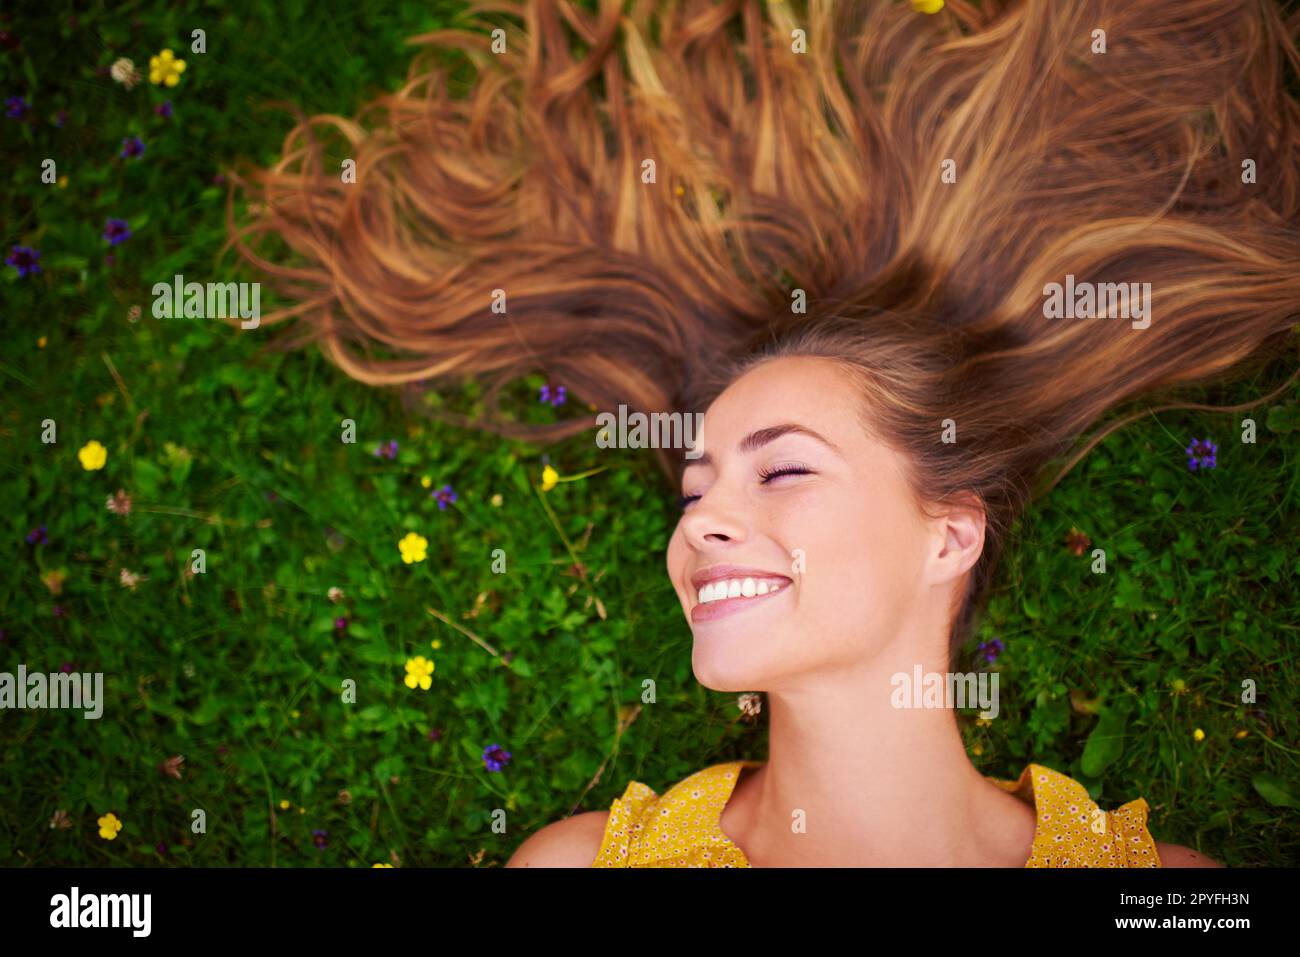 Hair extraordinaire. High angle shot of a carefree young woman relaxing in a field of grass and flowers. Stock Photo